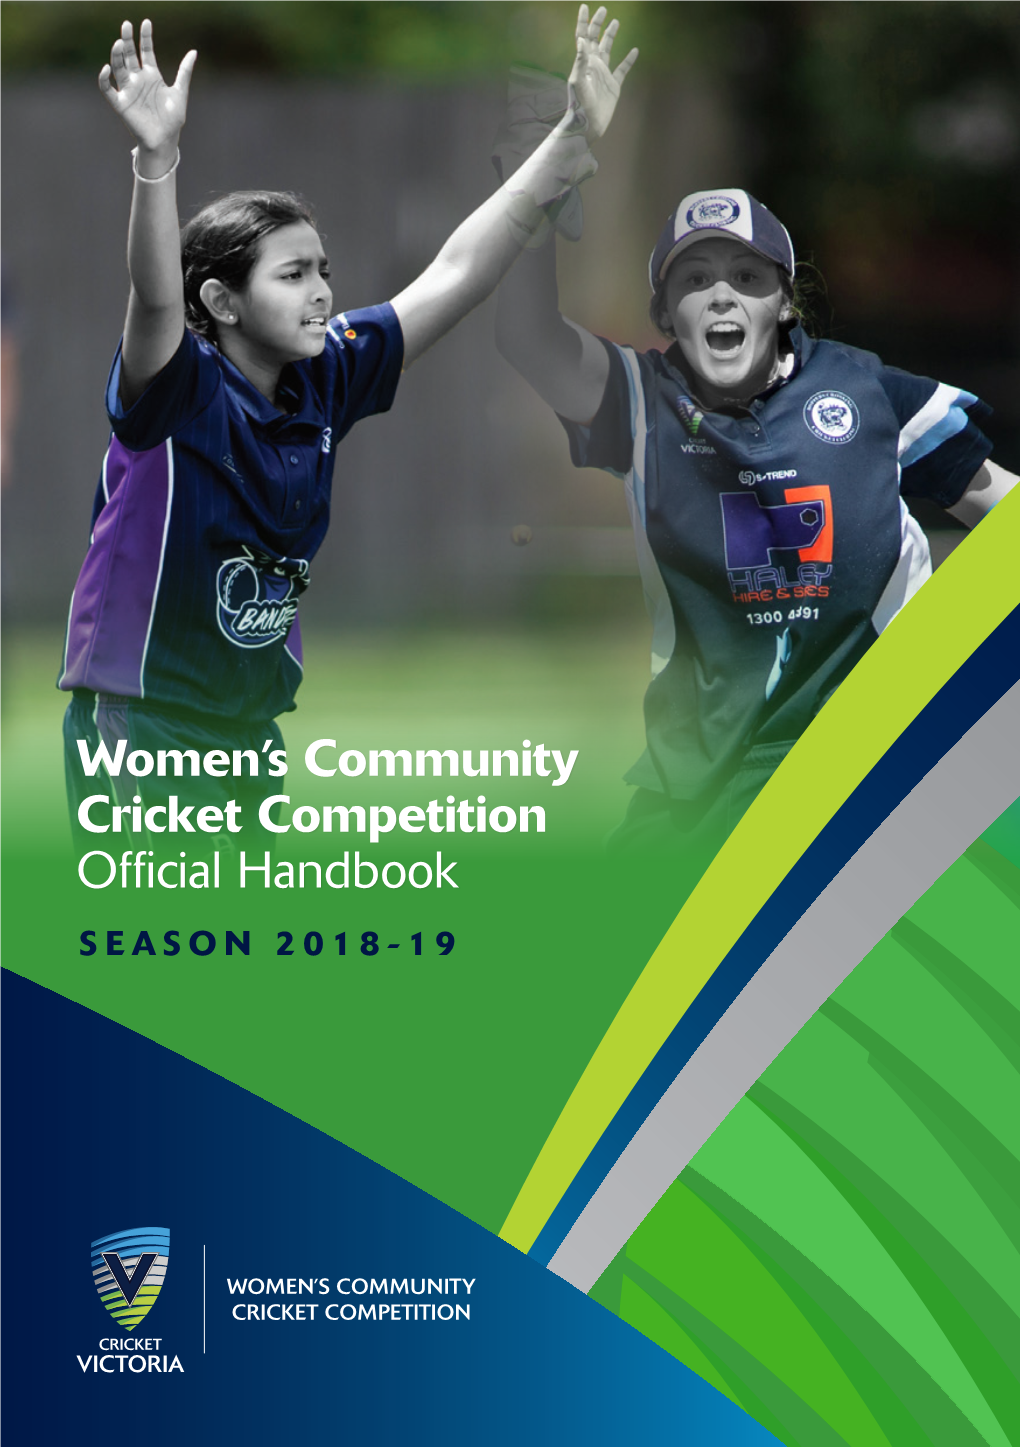 Women's Community Cricket Competition Official Handbook